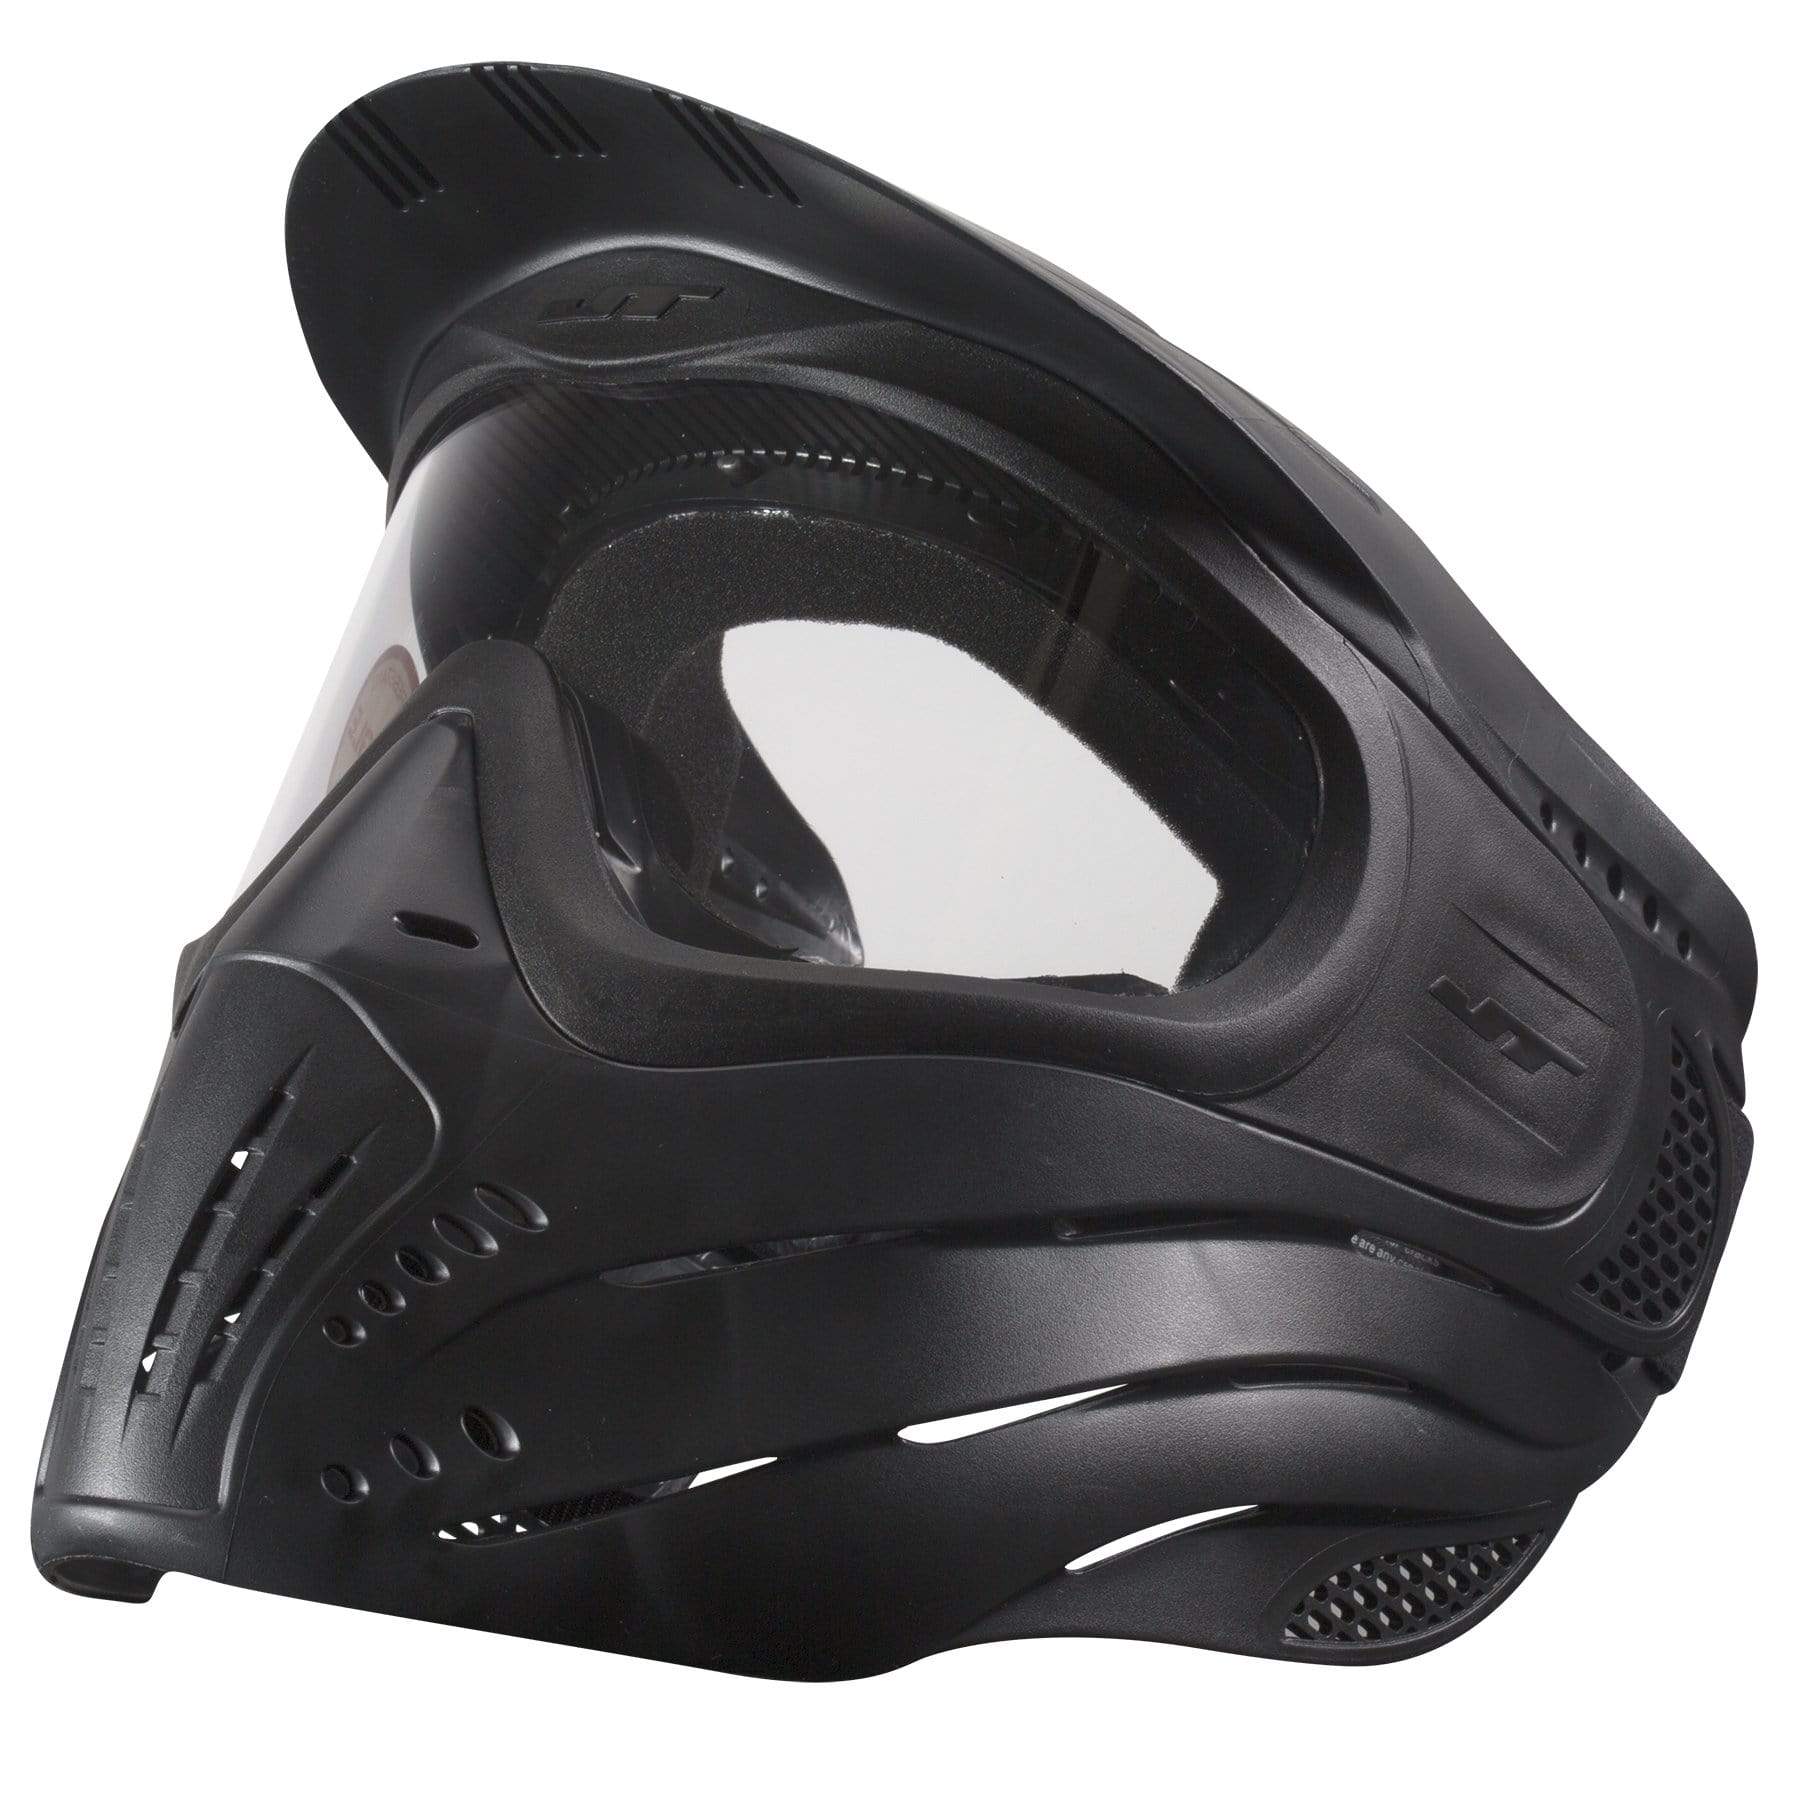 JT PREMISE PAINTBALL MASK - BLACK - Eminent Paintball And Airsoft